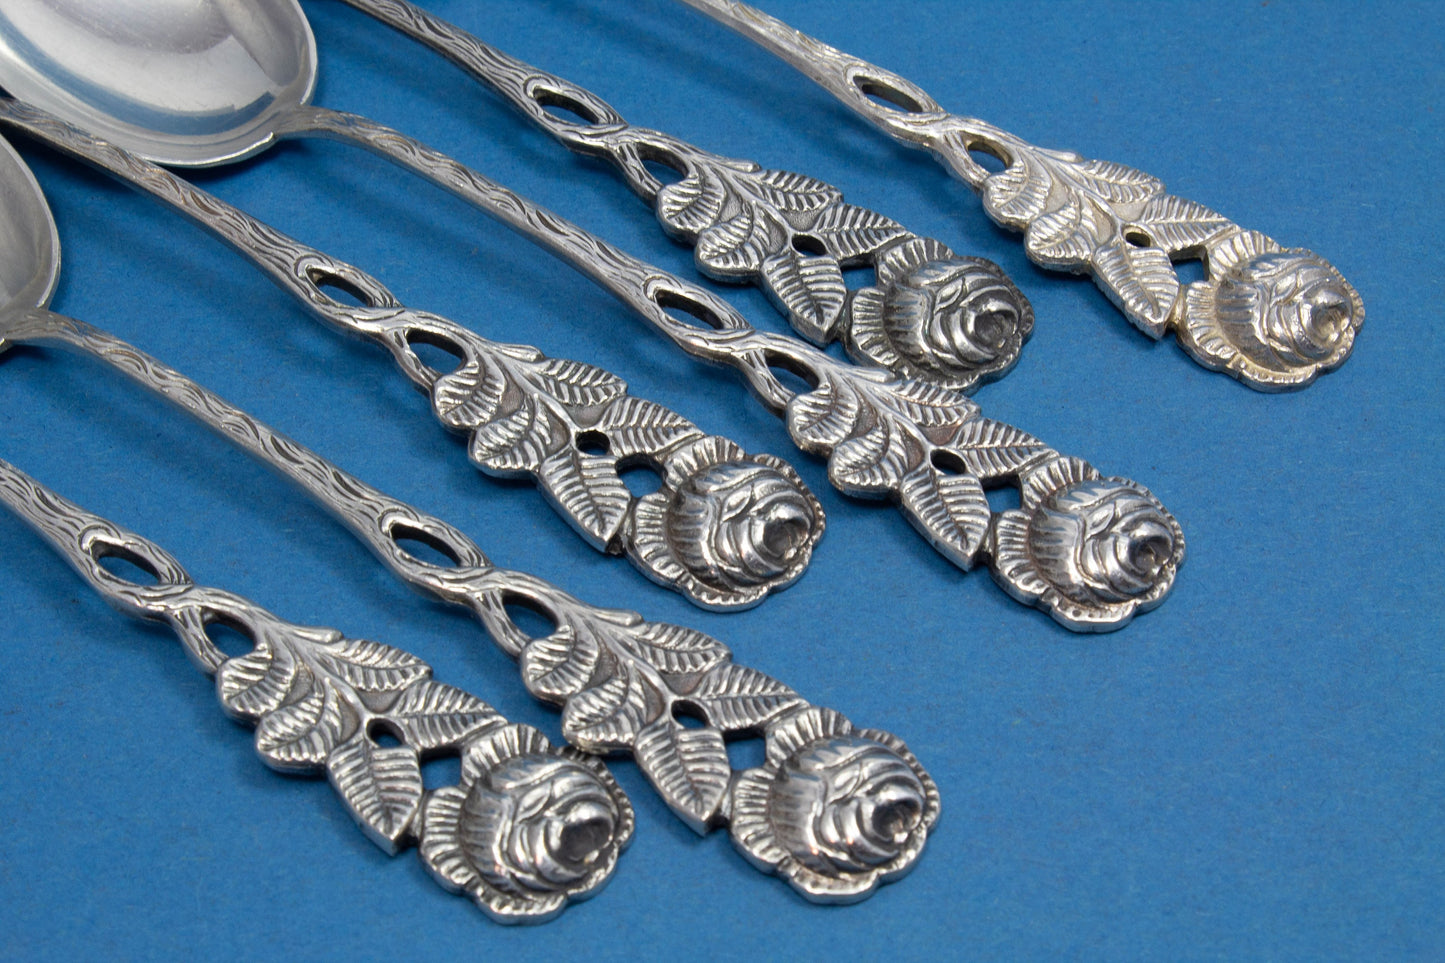 6 tea spoons with roses, silver plated, silverware